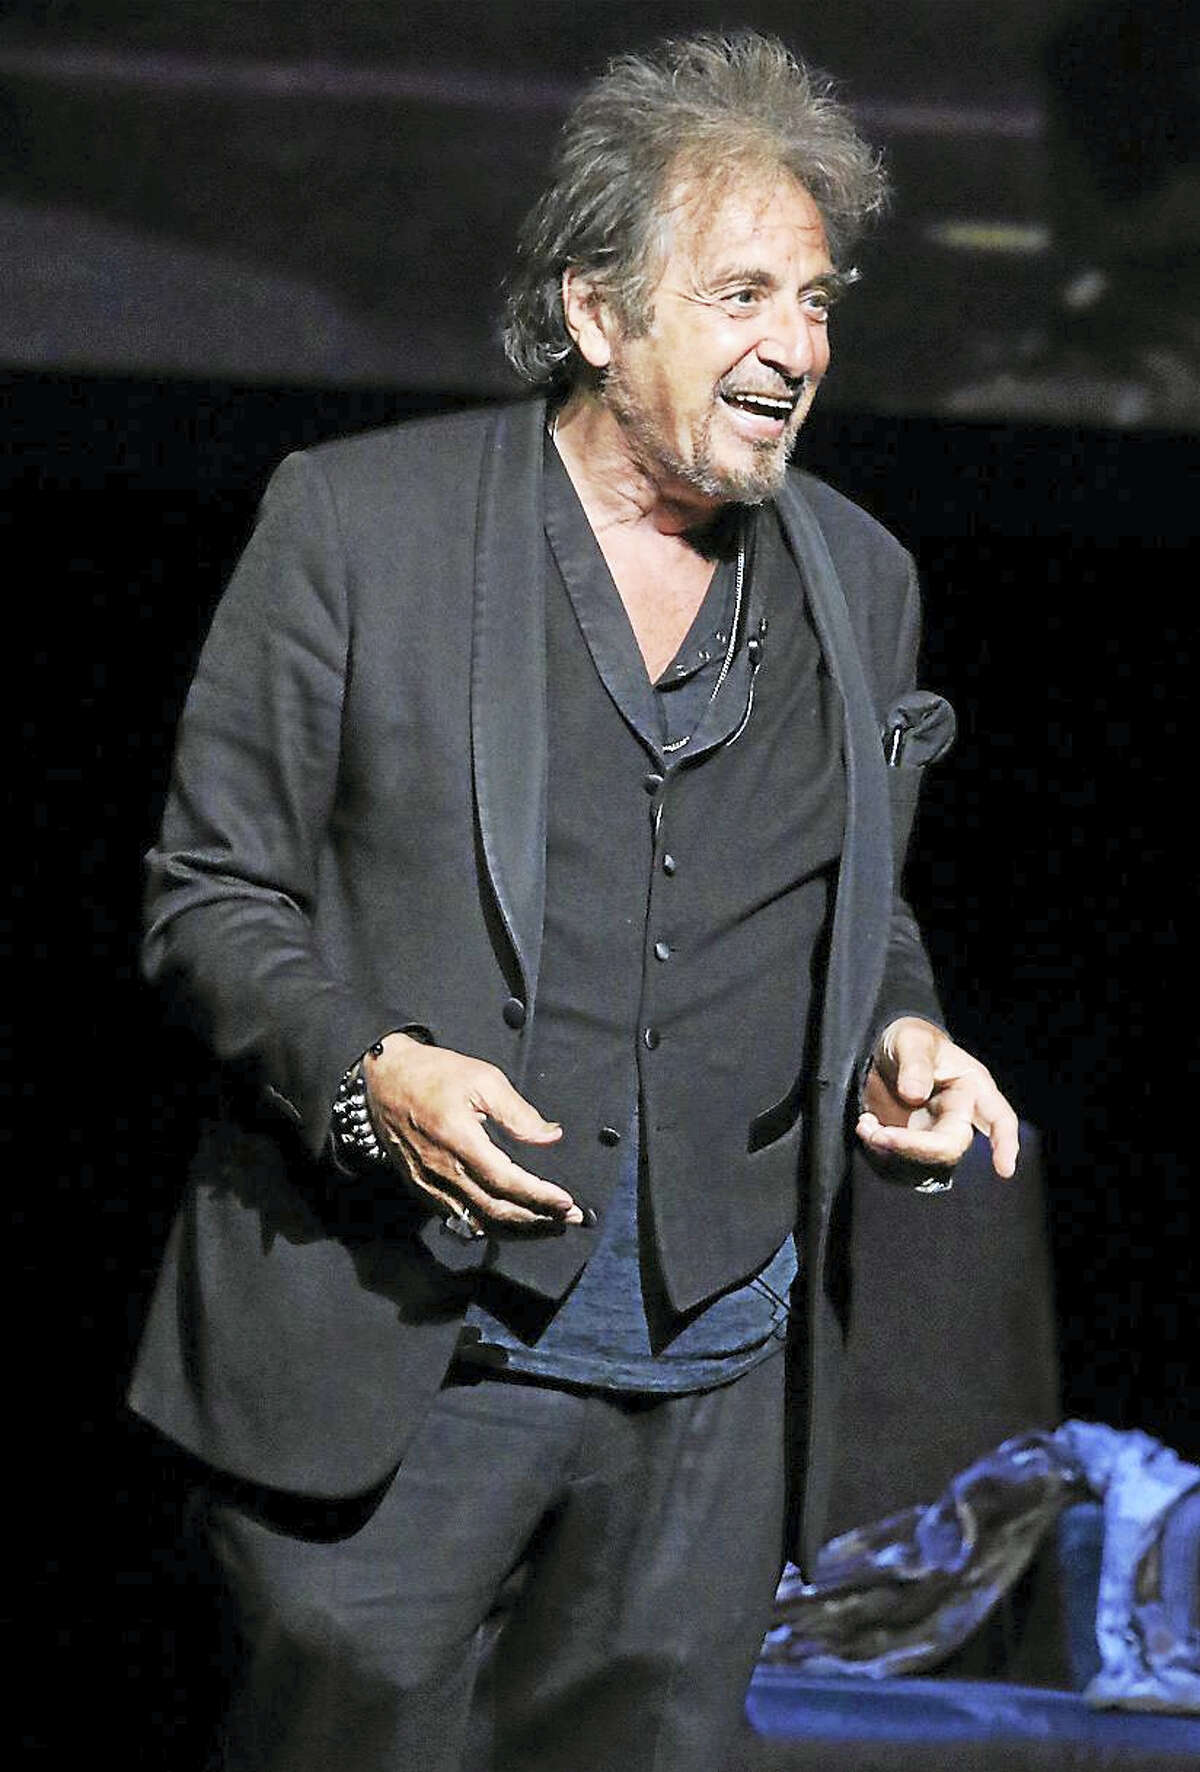 Photo by John AtashianActor Al Pacino is shown on stage in the Grand Theater at the Foxwoods Resort Casino during his appearance on Friday night June 3. The legendary actor, known for his roles in "The Godfather" trilogy, "Serpico," and “Scarface” entertained the large crowd of fans with conversation on his award-winning career and interesting life experiences. Pacino has been awarded the Golden Globe Cecil B. DeMille Award for Lifetime Achievement in Motion Pictures, the American Film Institute Life Achievement Award and in 2011 he was received the National Merit of Arts from President Obama. Comedian and co-host Joy Behar joined Al on stage during his performance and she did a great job keeping the conversation, questions and humor flowing.